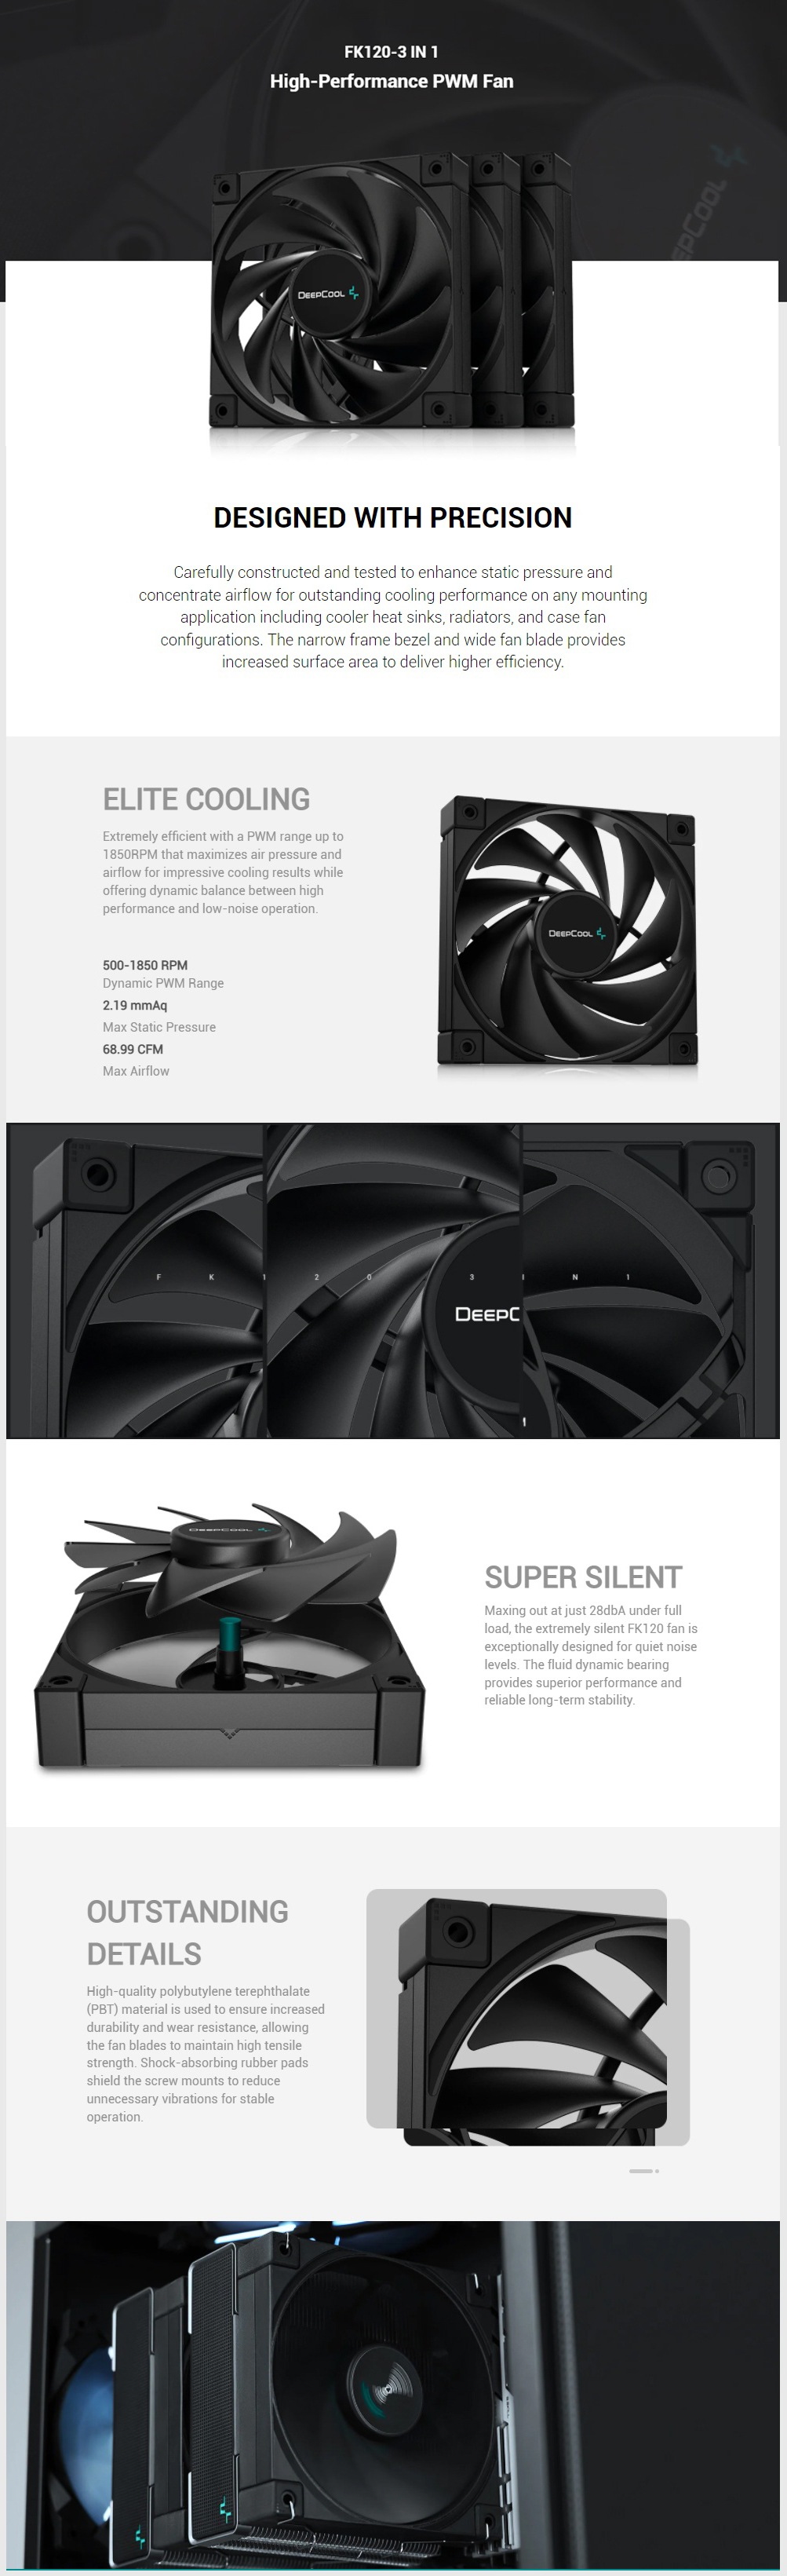 A large marketing image providing additional information about the product DeepCool FK120 120mm Fan - Additional alt info not provided